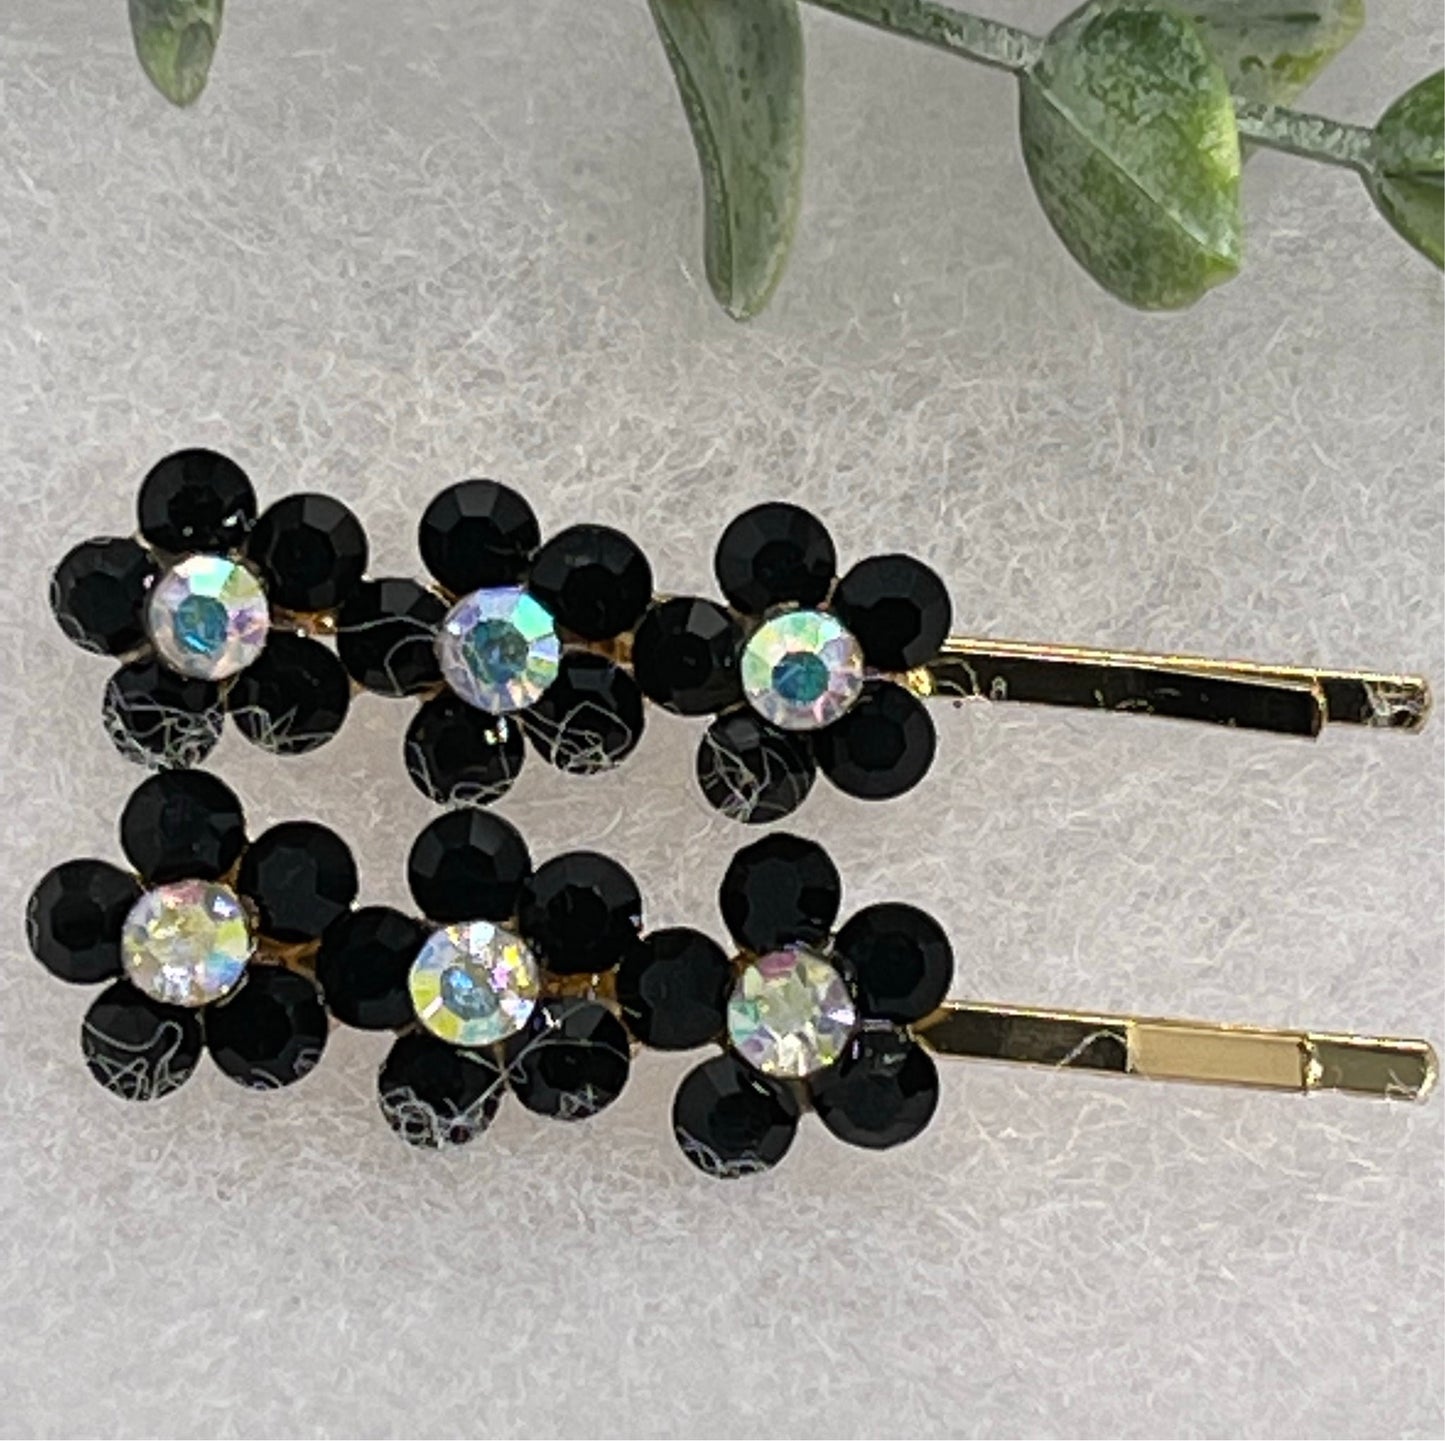 Black crystal rhinestone flowers approximately 2.0” gold tone hair pins 2 pc set wedding bridal shower engagement formal princess accessory accessories